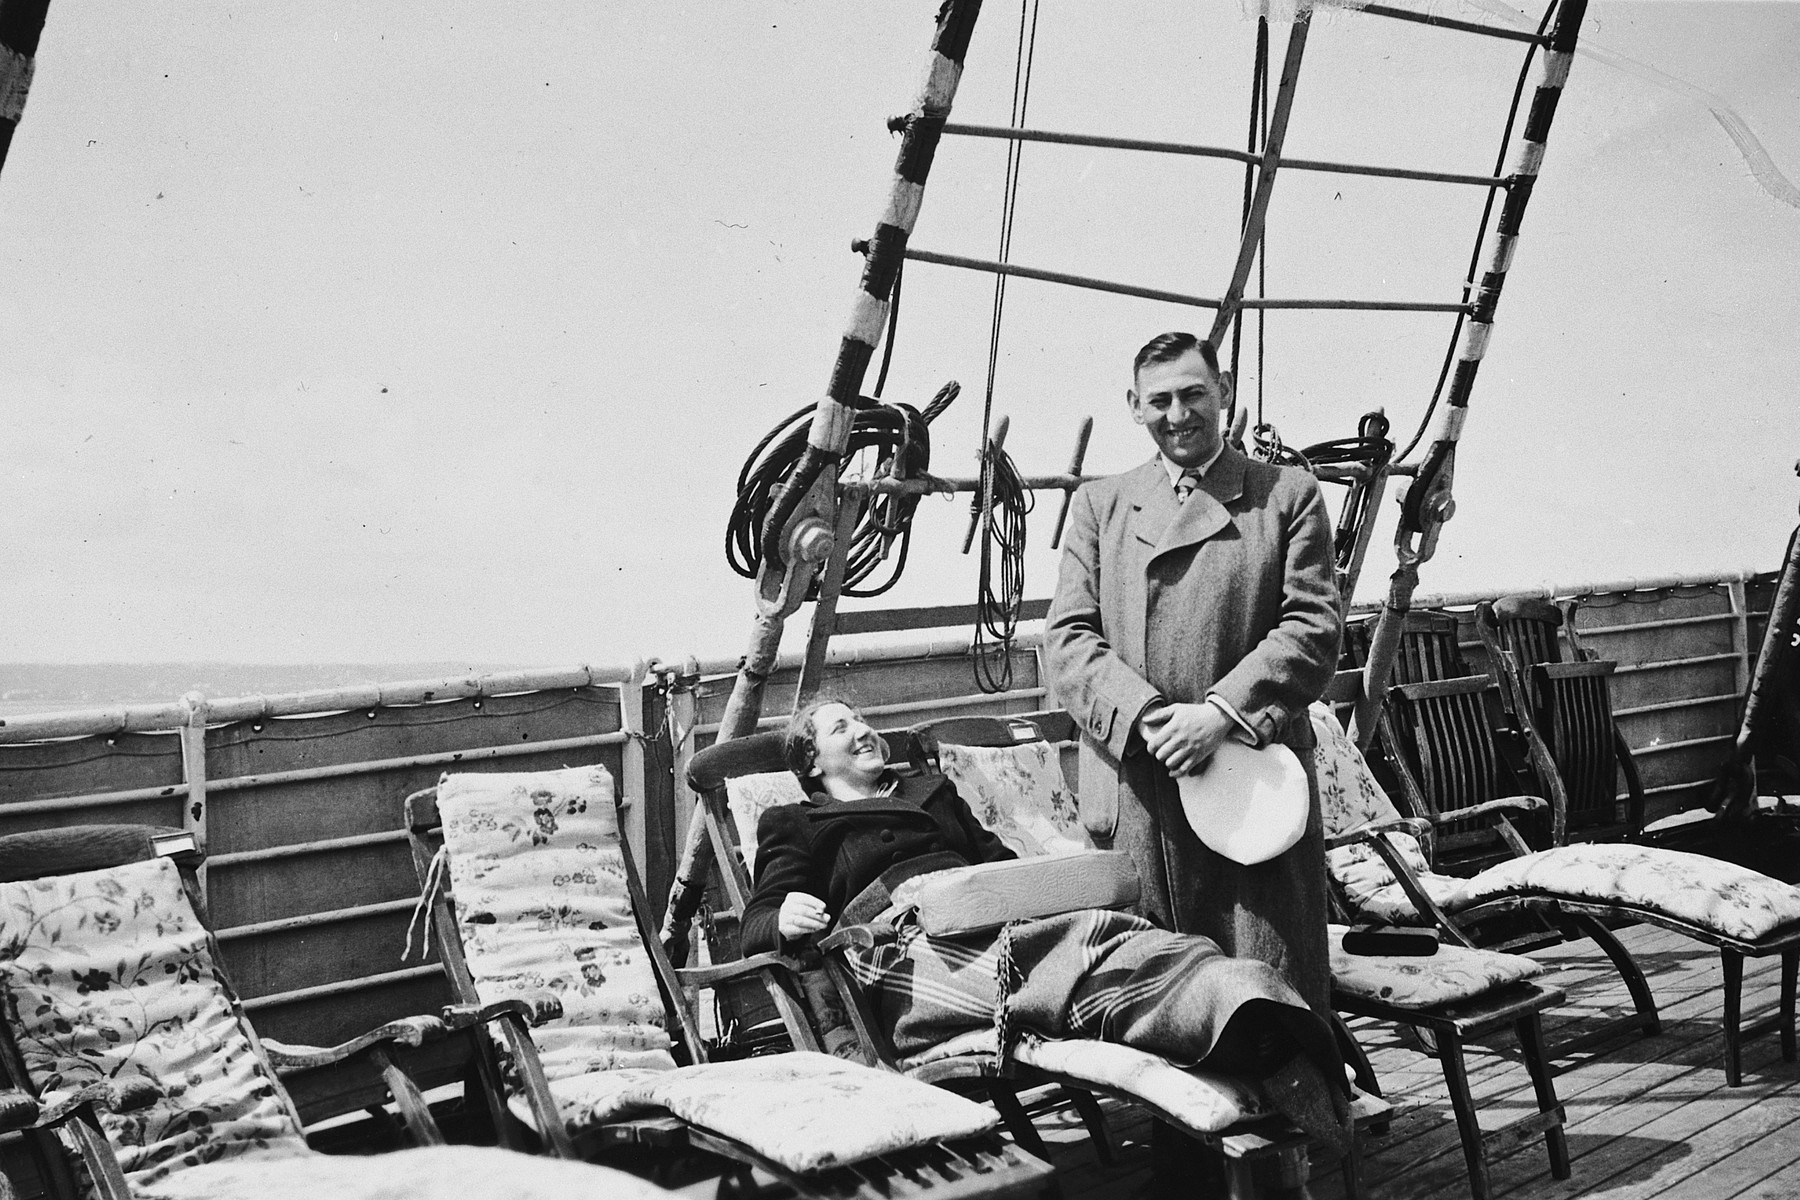 A female Jewish refugee relaxes on a deck chair while her husband stands next to her on the upper deck of the St. Louis.

Pictured are Ilse and Kurt Marcus.